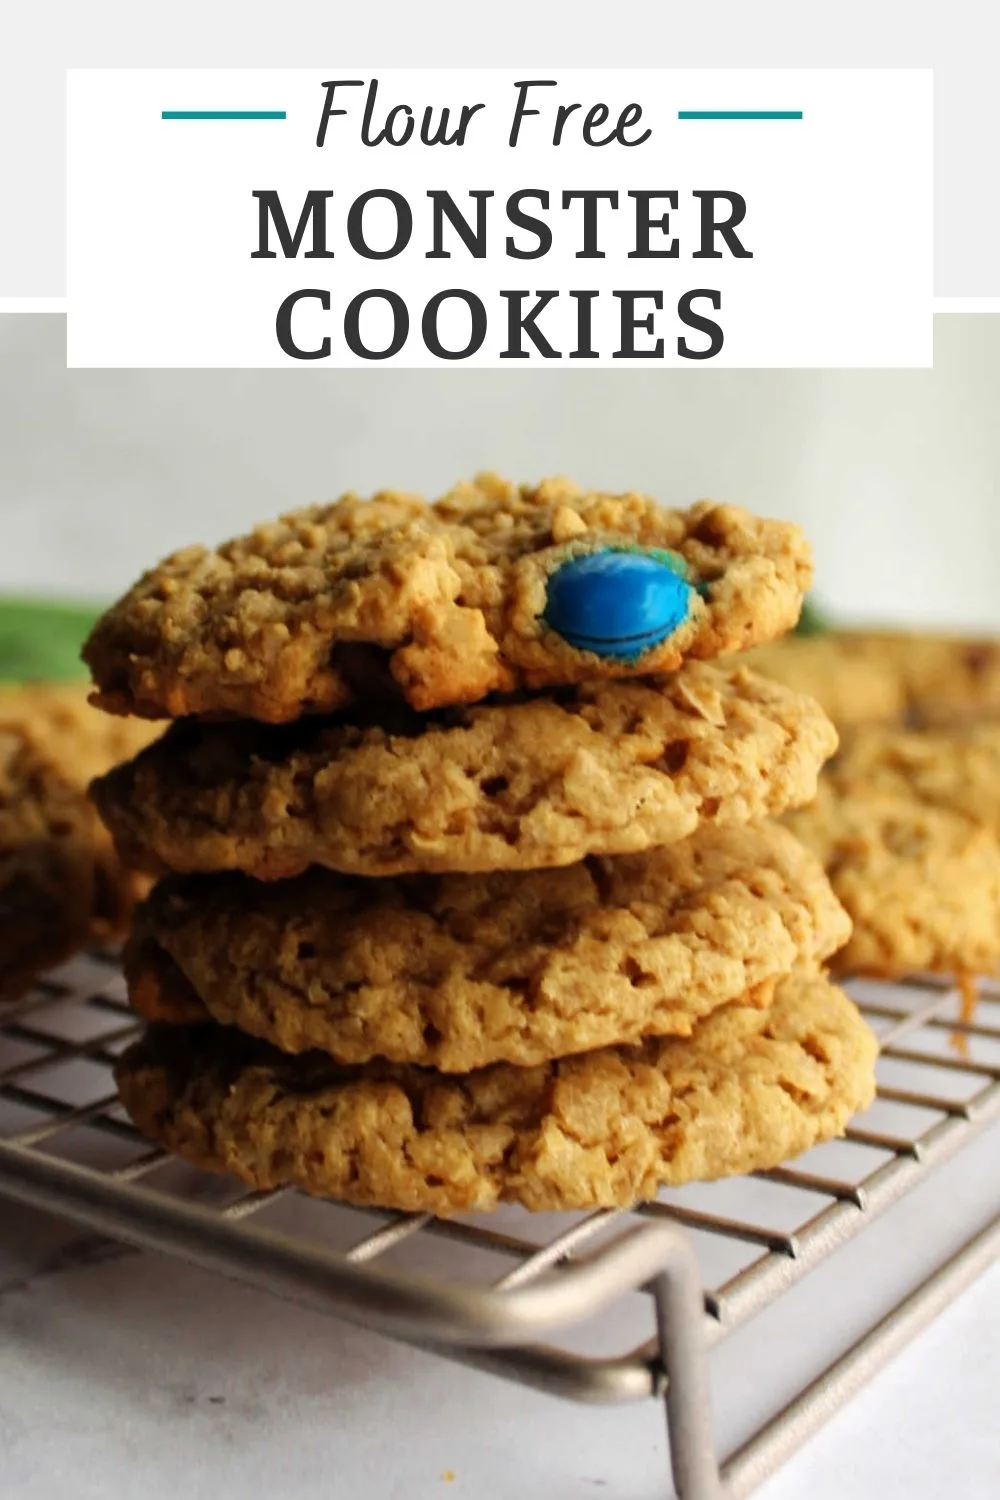 Monster cookies are one of our family’s absolute favorite recipes! Loaded with peanut butter, oatmeal and chocolate candies, they turn out chewy and delicious! The batch is big, but freezes well too for cookies any time you want them!